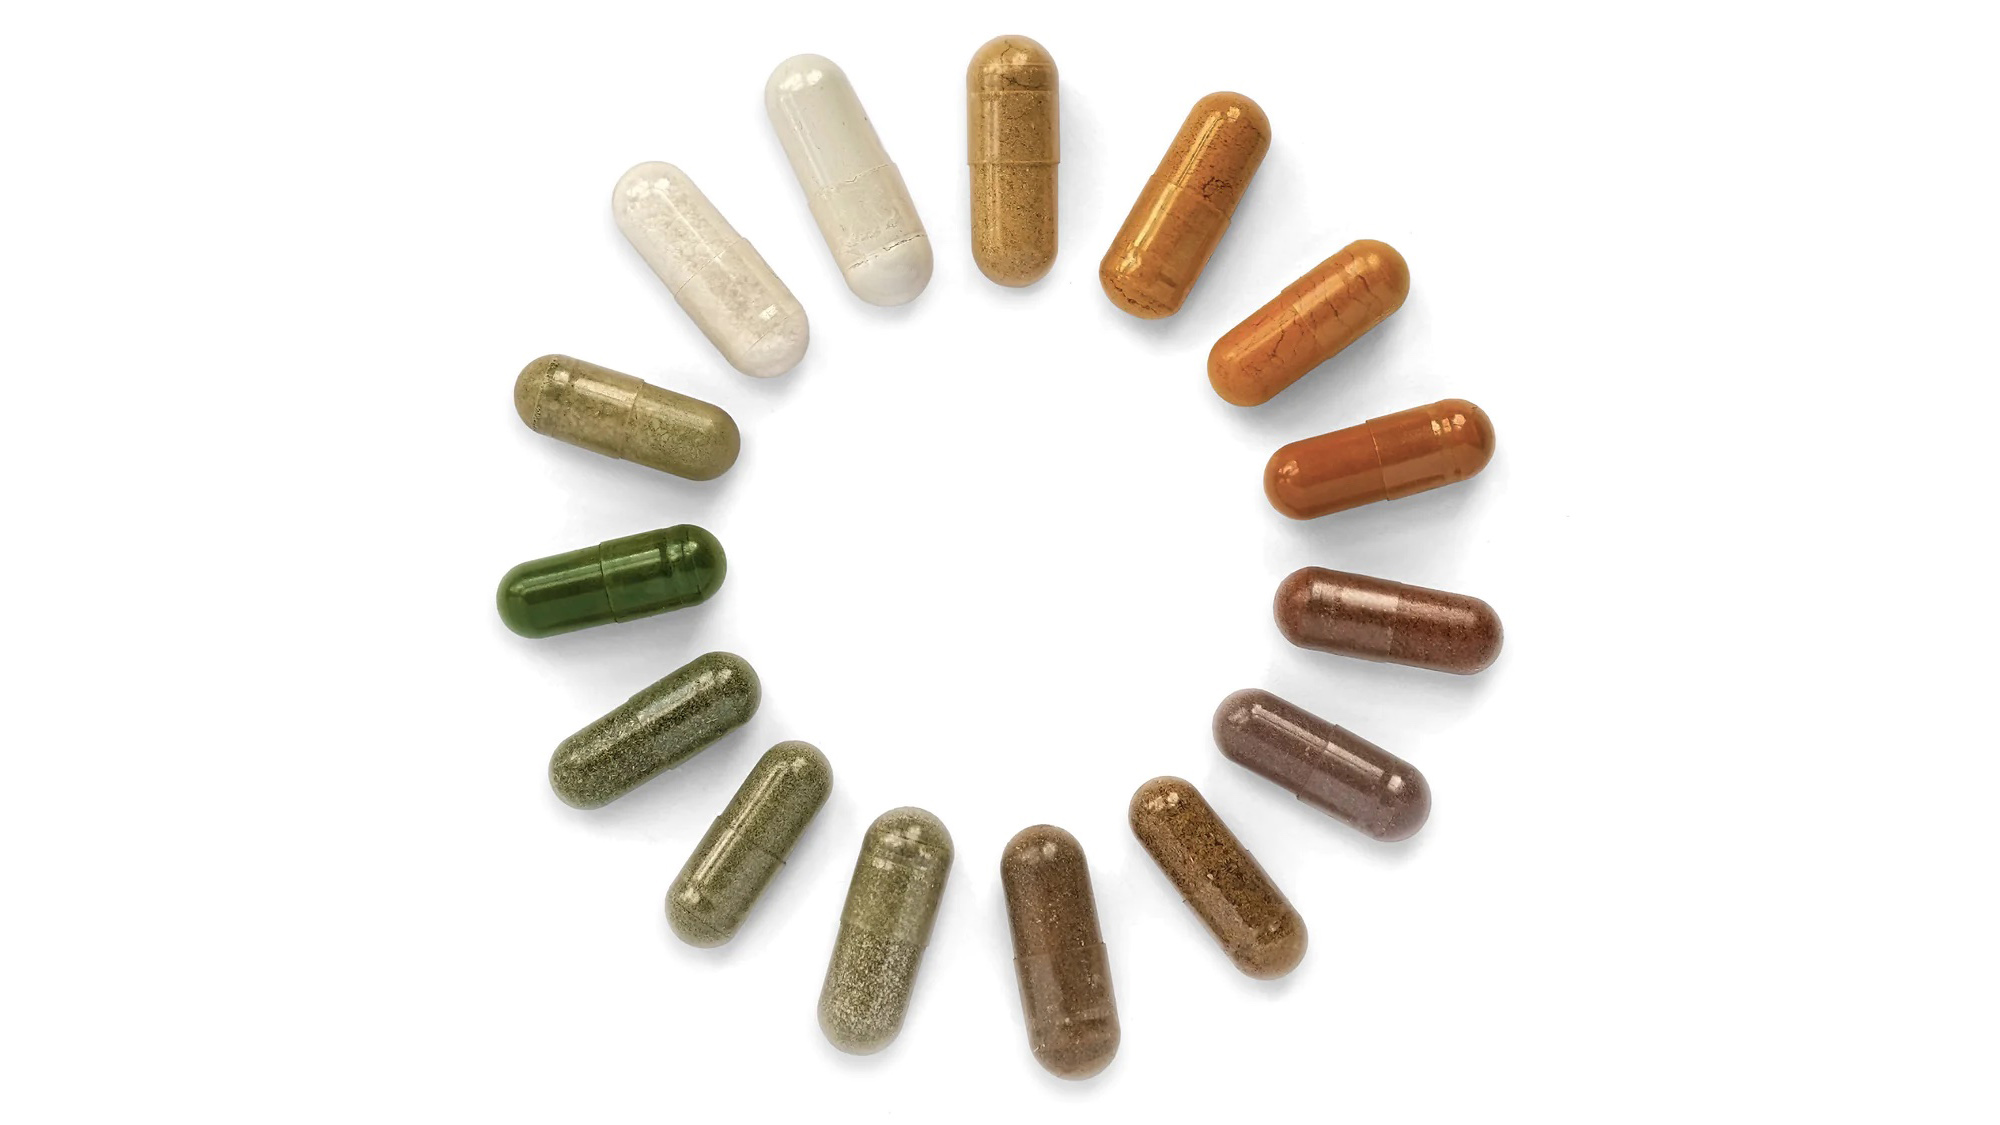 Supplements: What to look for